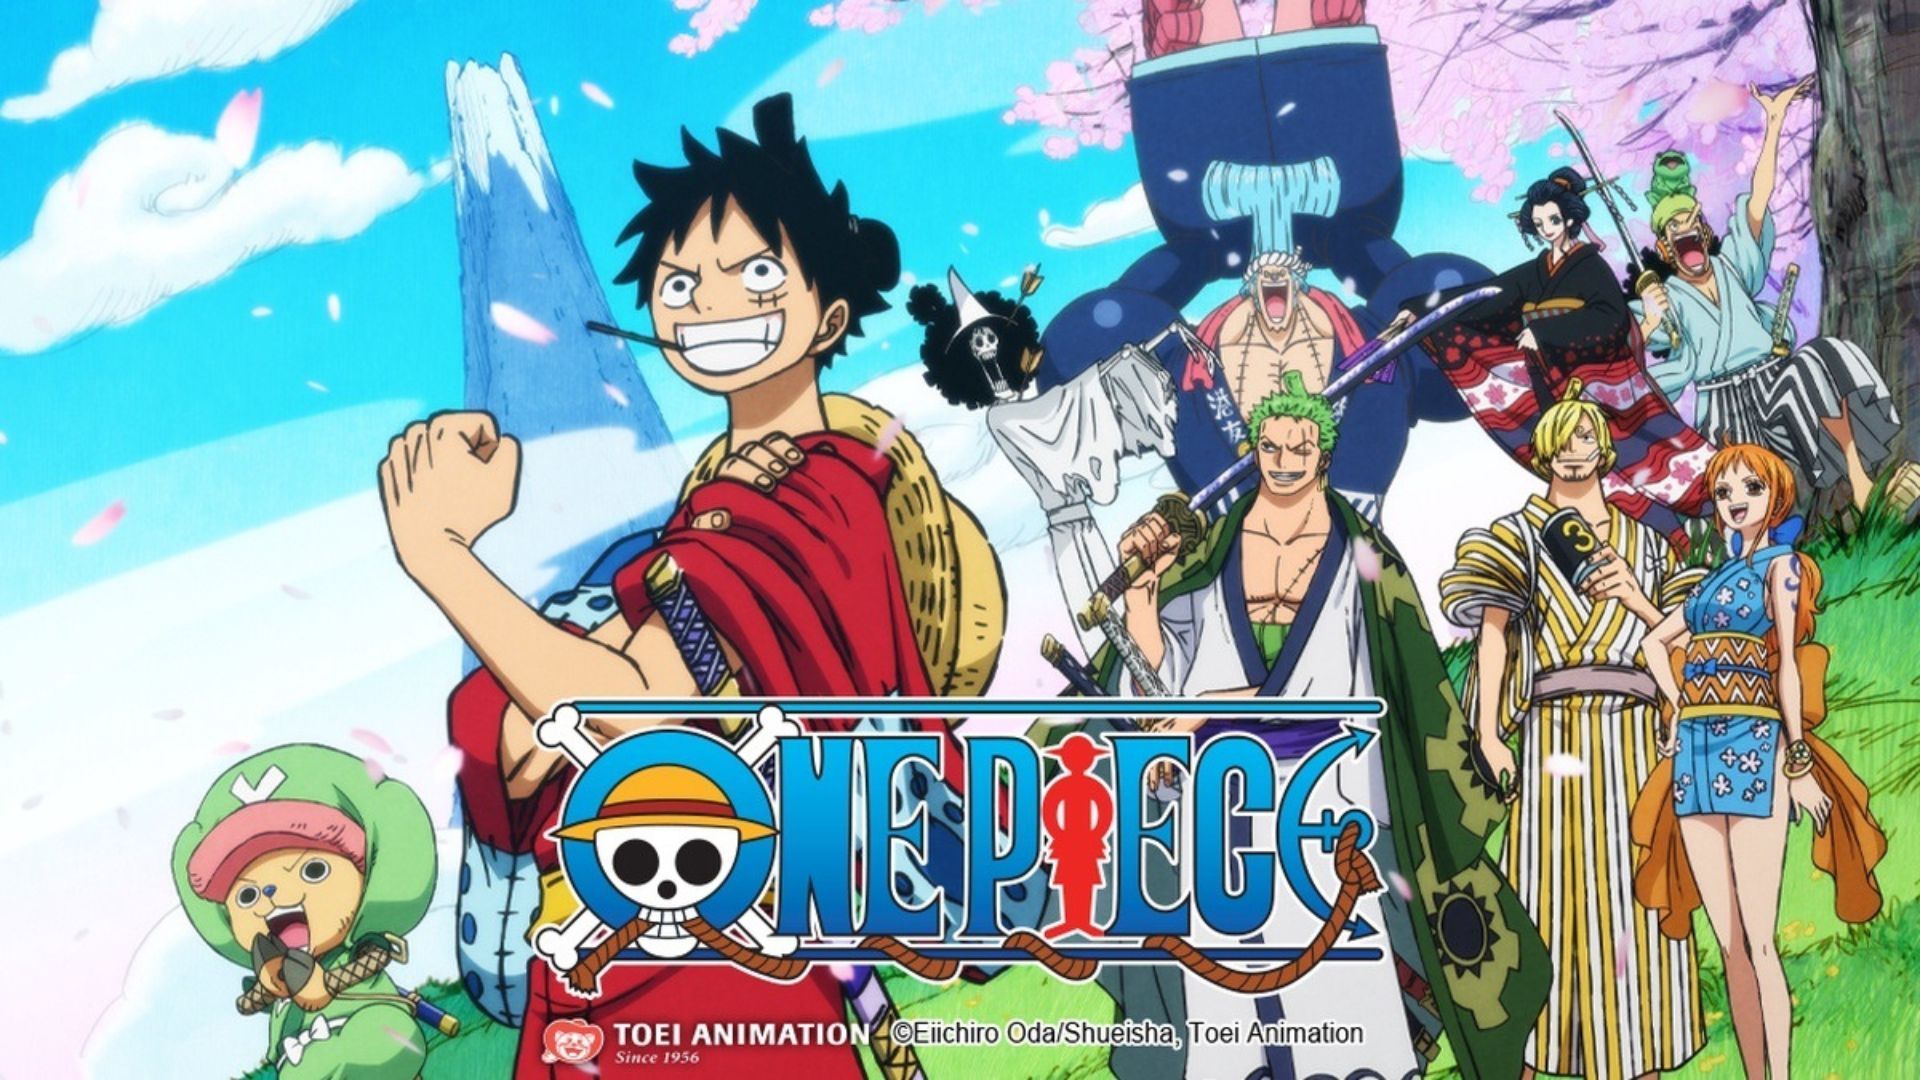 Luffy's 15 Strongest Allies In One Piece, Ranked